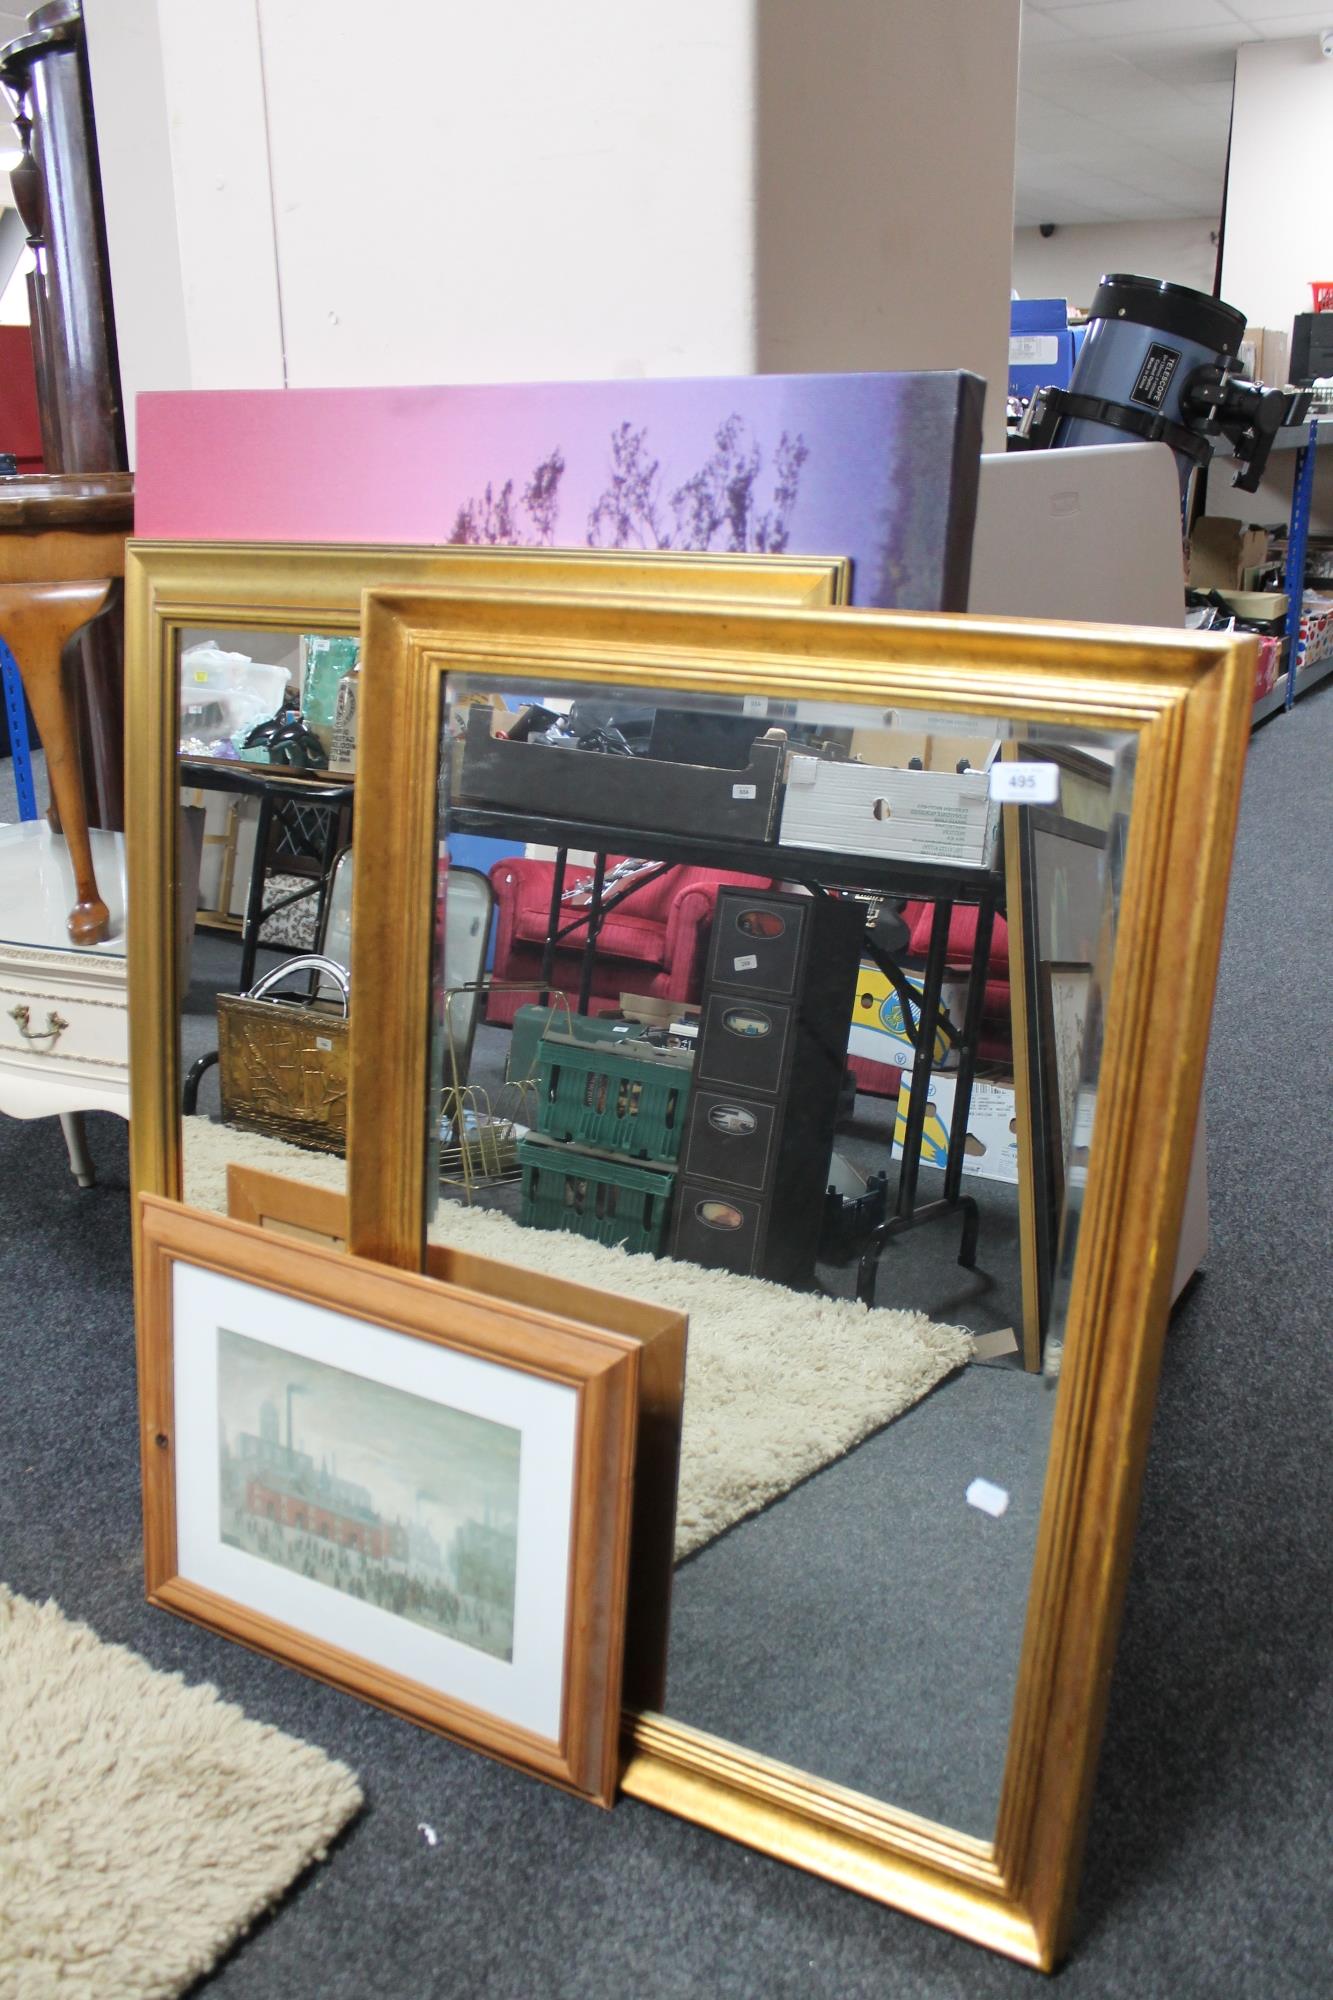 Two gilt framed mirrors together with a wall canvas - rural scene and a framed L S Lowry print